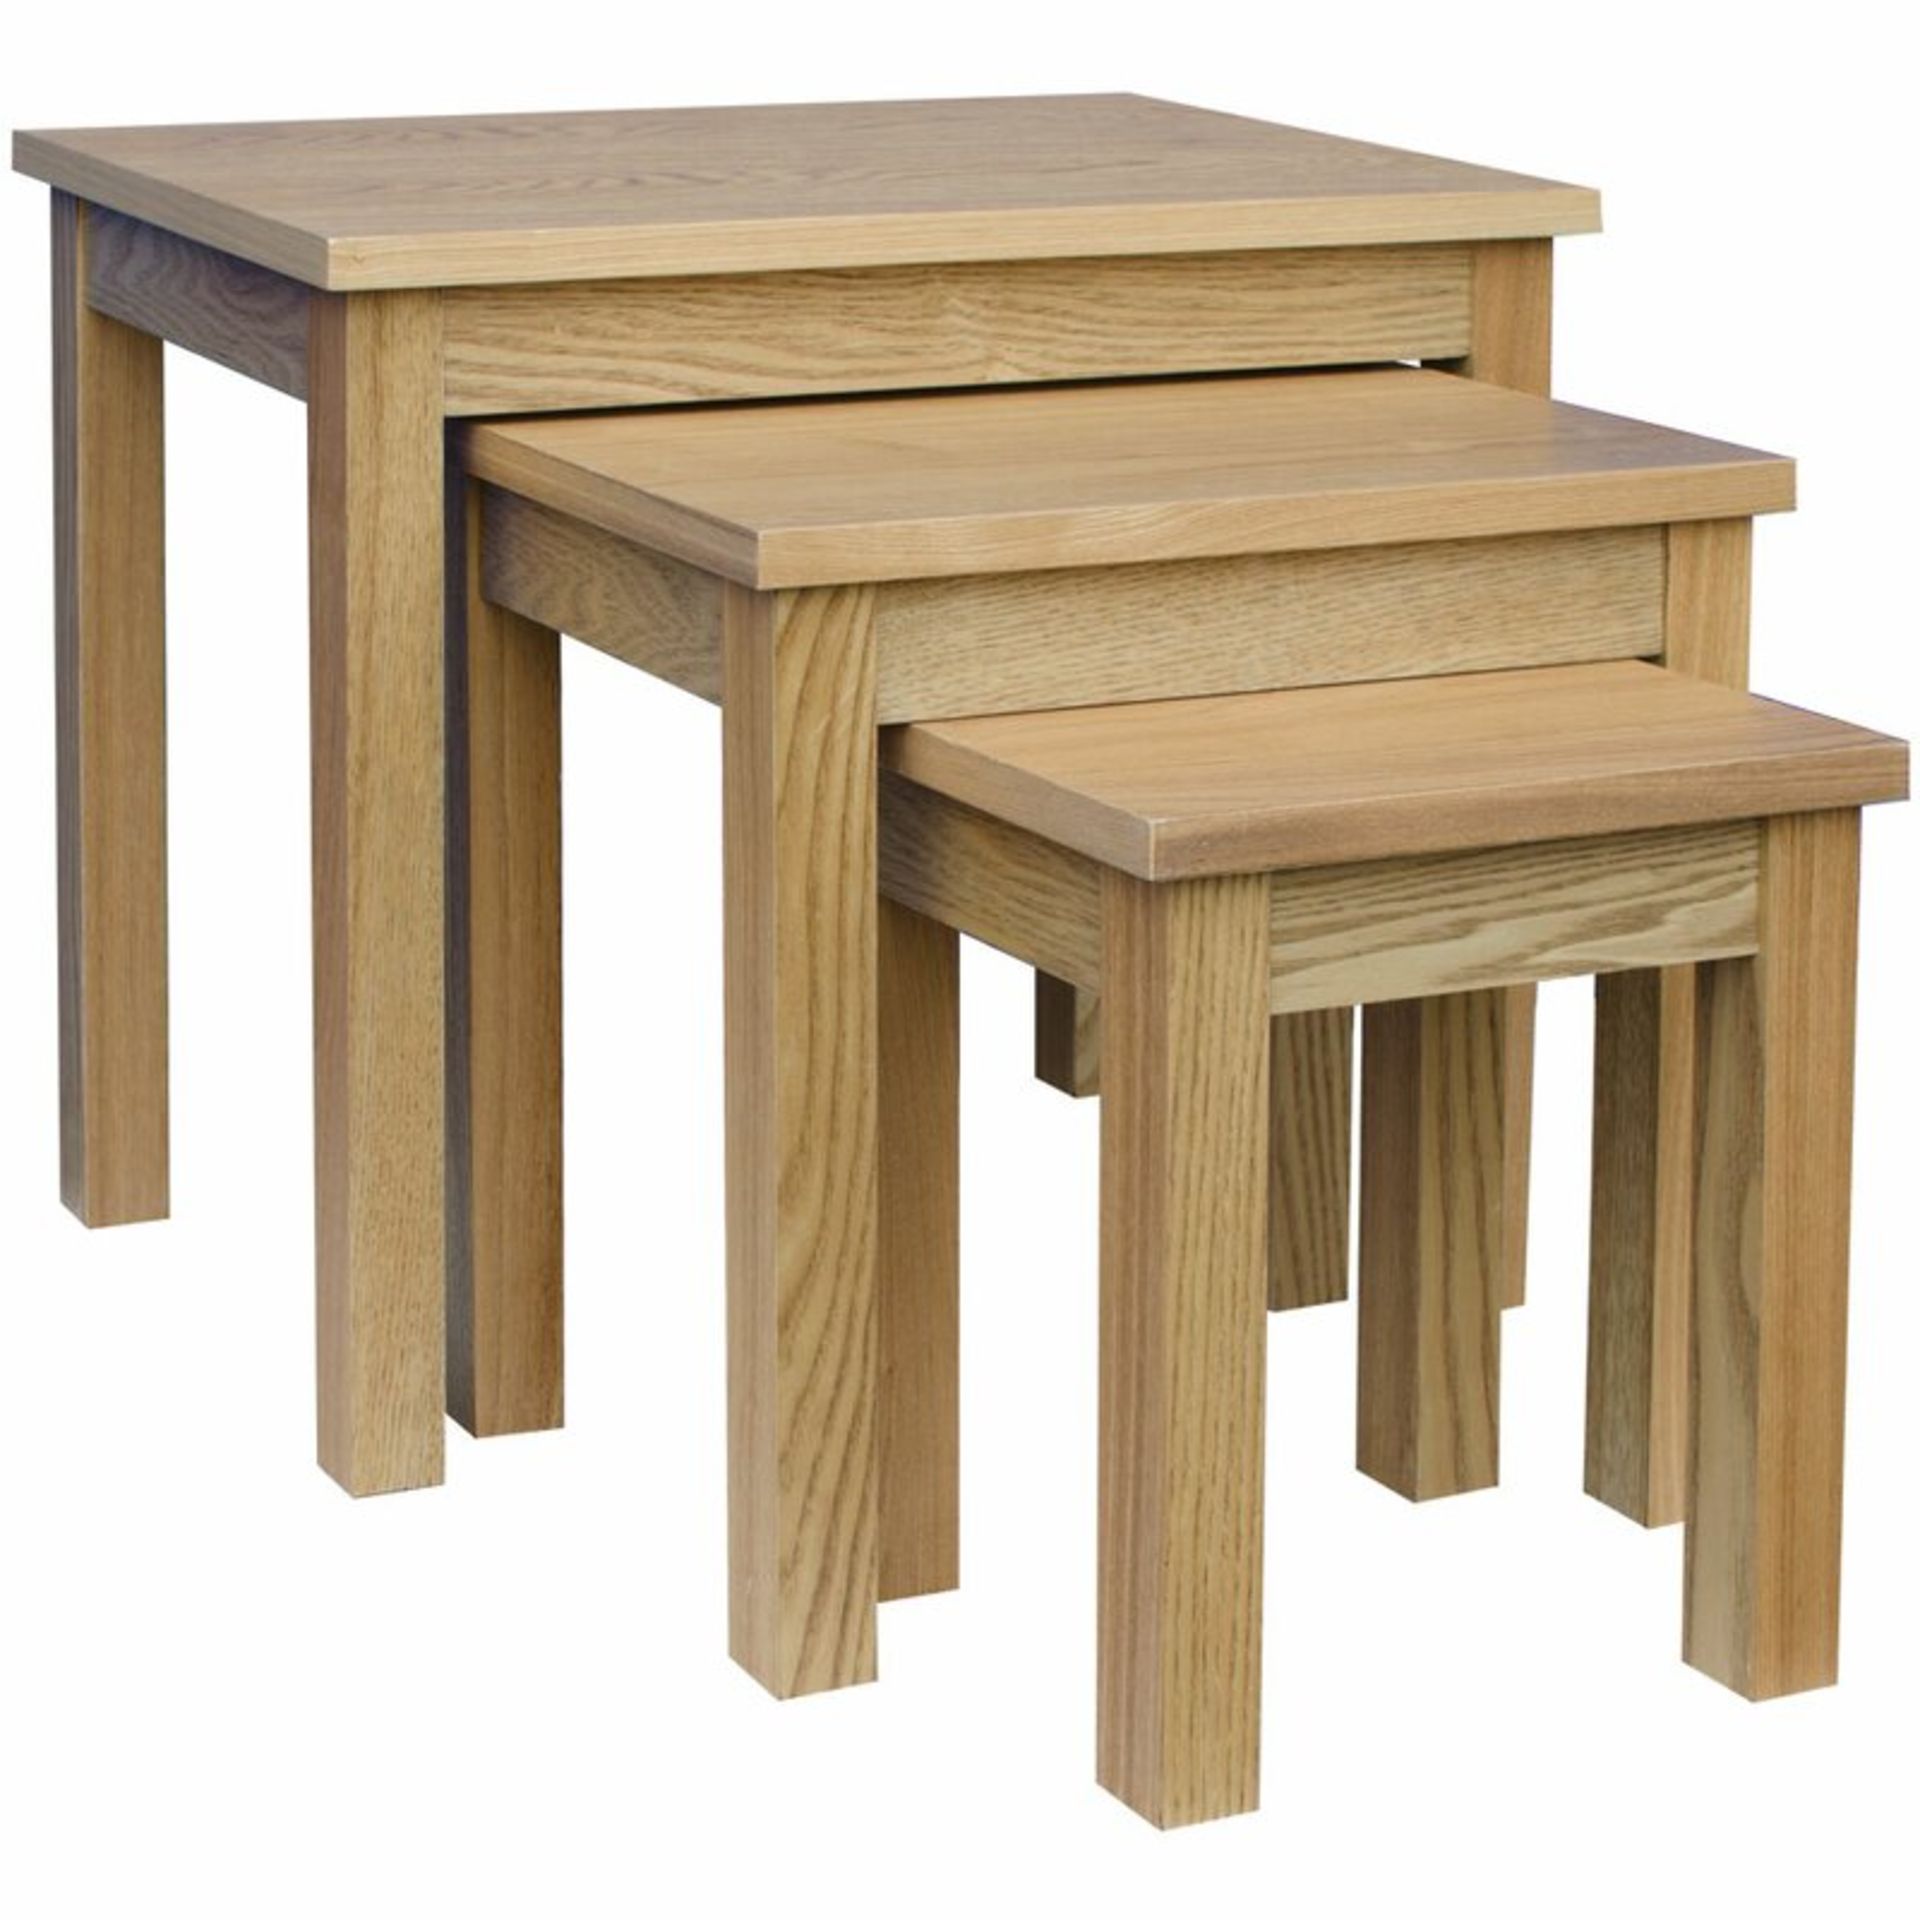 3 Piece Nest of Tables - RRP £97.99